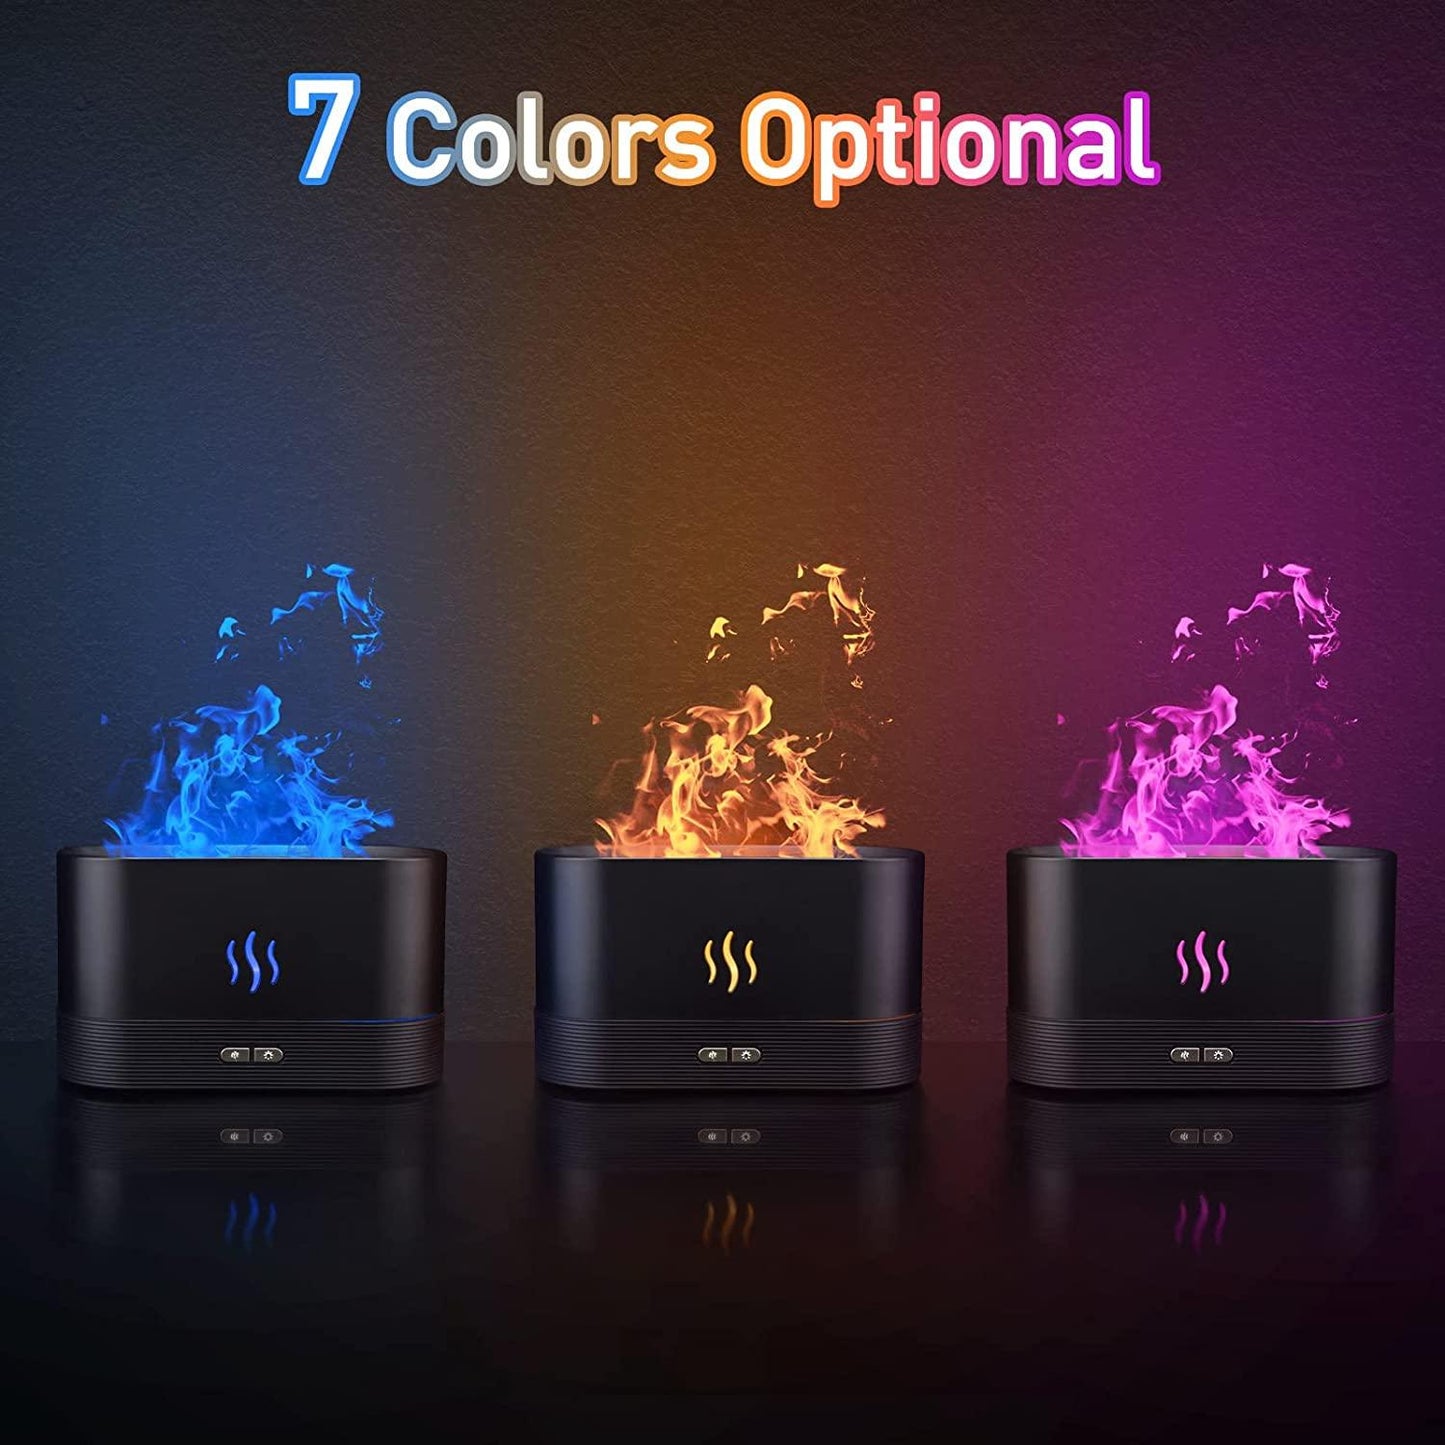 HIVAGI® Flame Air Aroma Diffuser Humidifier, 7 Flame Color Noiseless Essential Oil Diffuser for Home,Office,Yoga (8Hours Black) - HIVAGI®